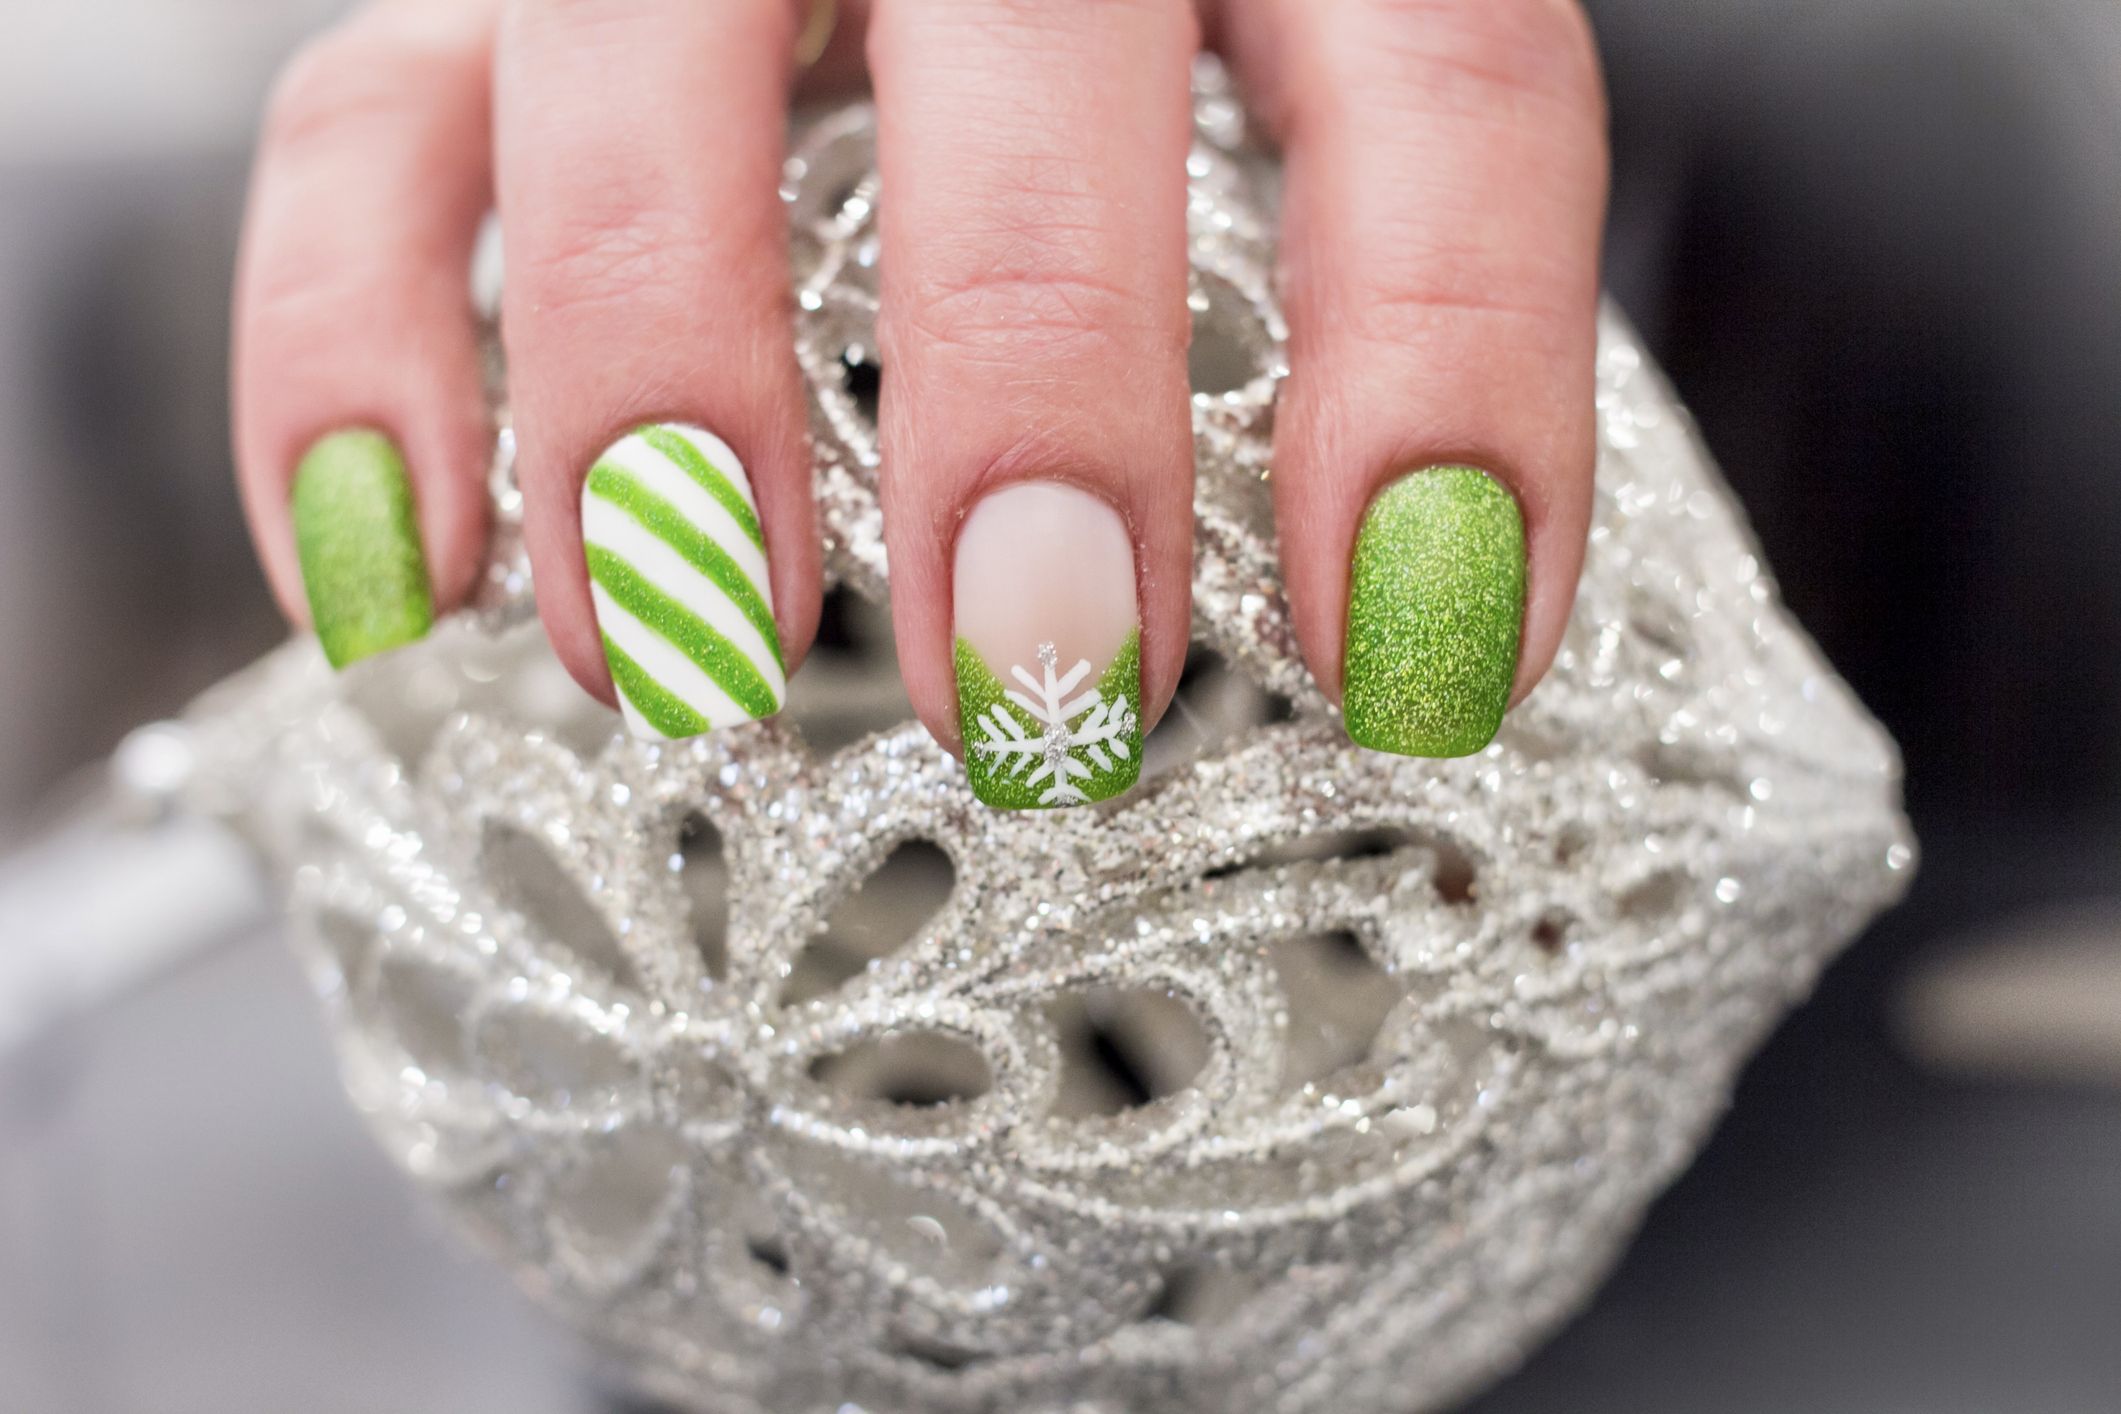 6. Red and Green Christmas Nail Art - wide 10